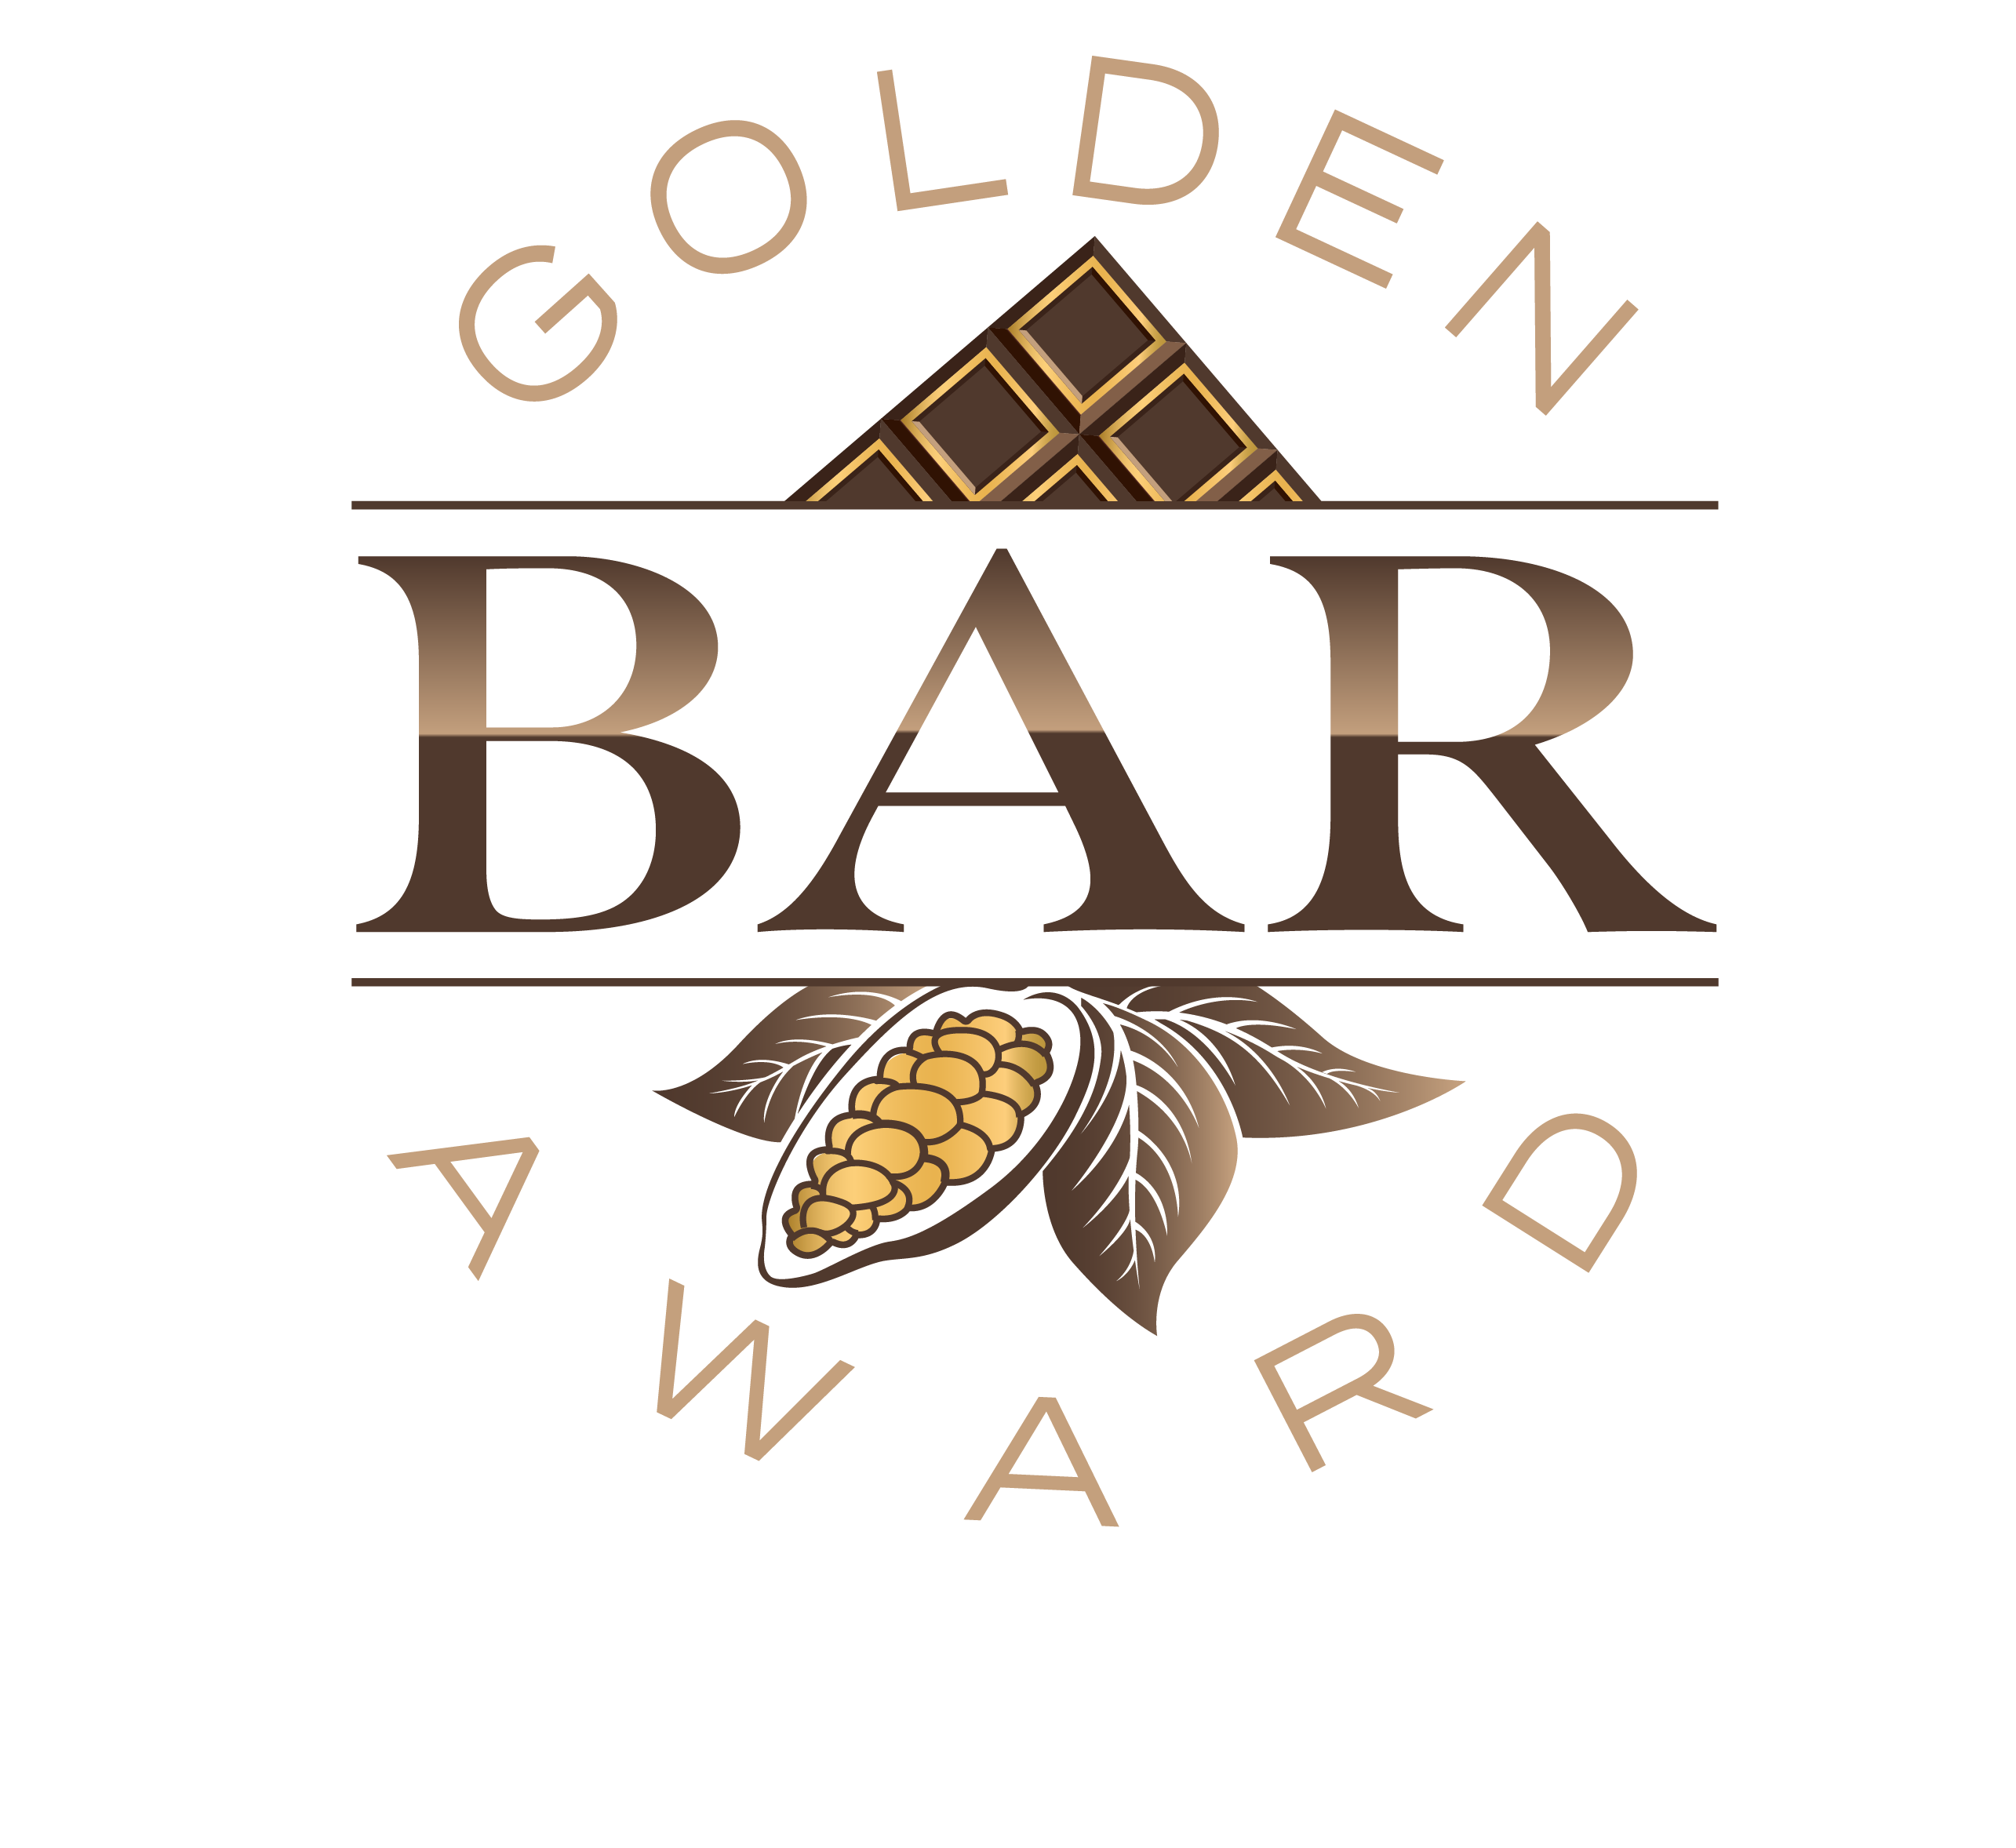 The Craft Chocolate Awards logo. The top has a curving golden brown "GOLDEN", a larger "BAR" in the middle surrounded by cacao leaves and pods, and a curving "AWARD" at the bottom.